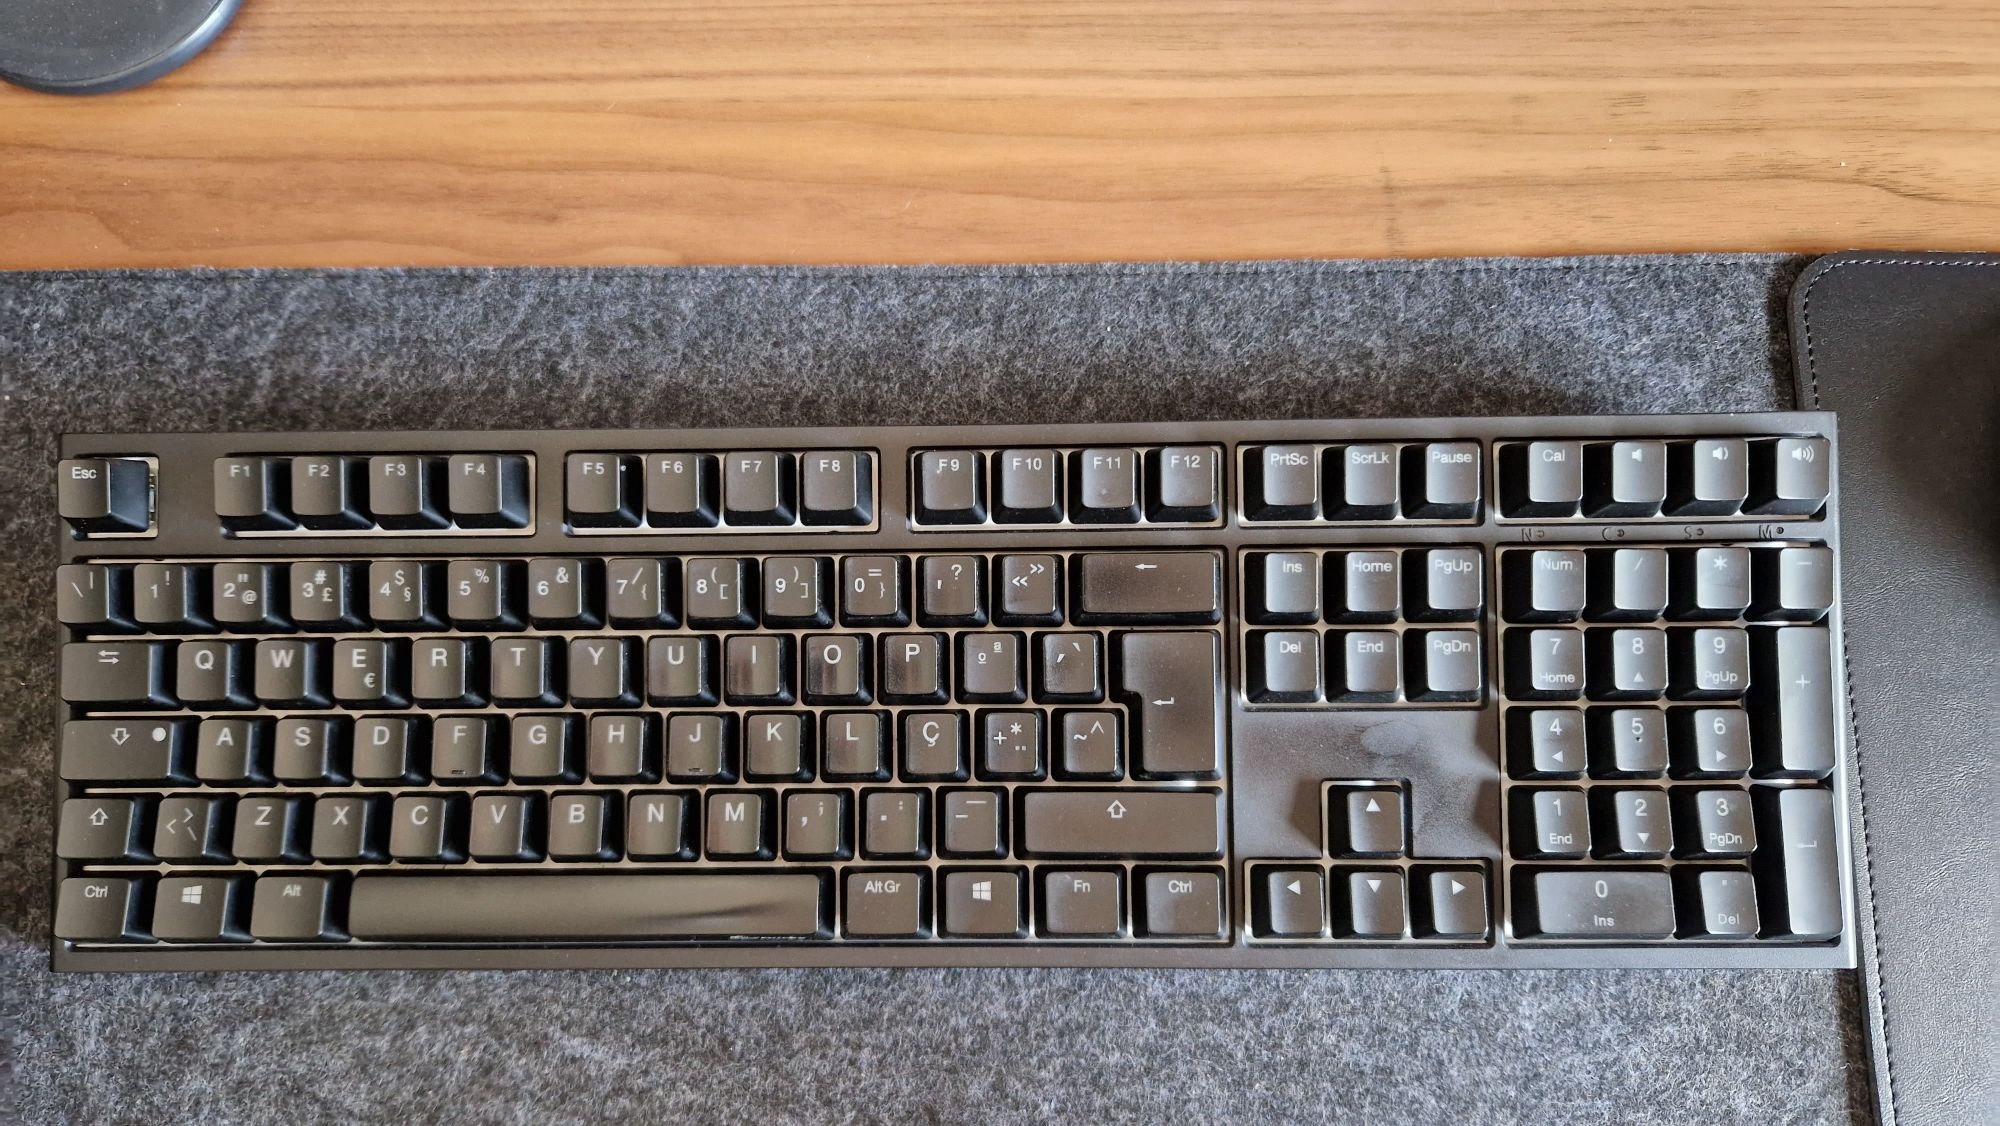 Teclado Ducky one 2 - full size, cherry brown switches